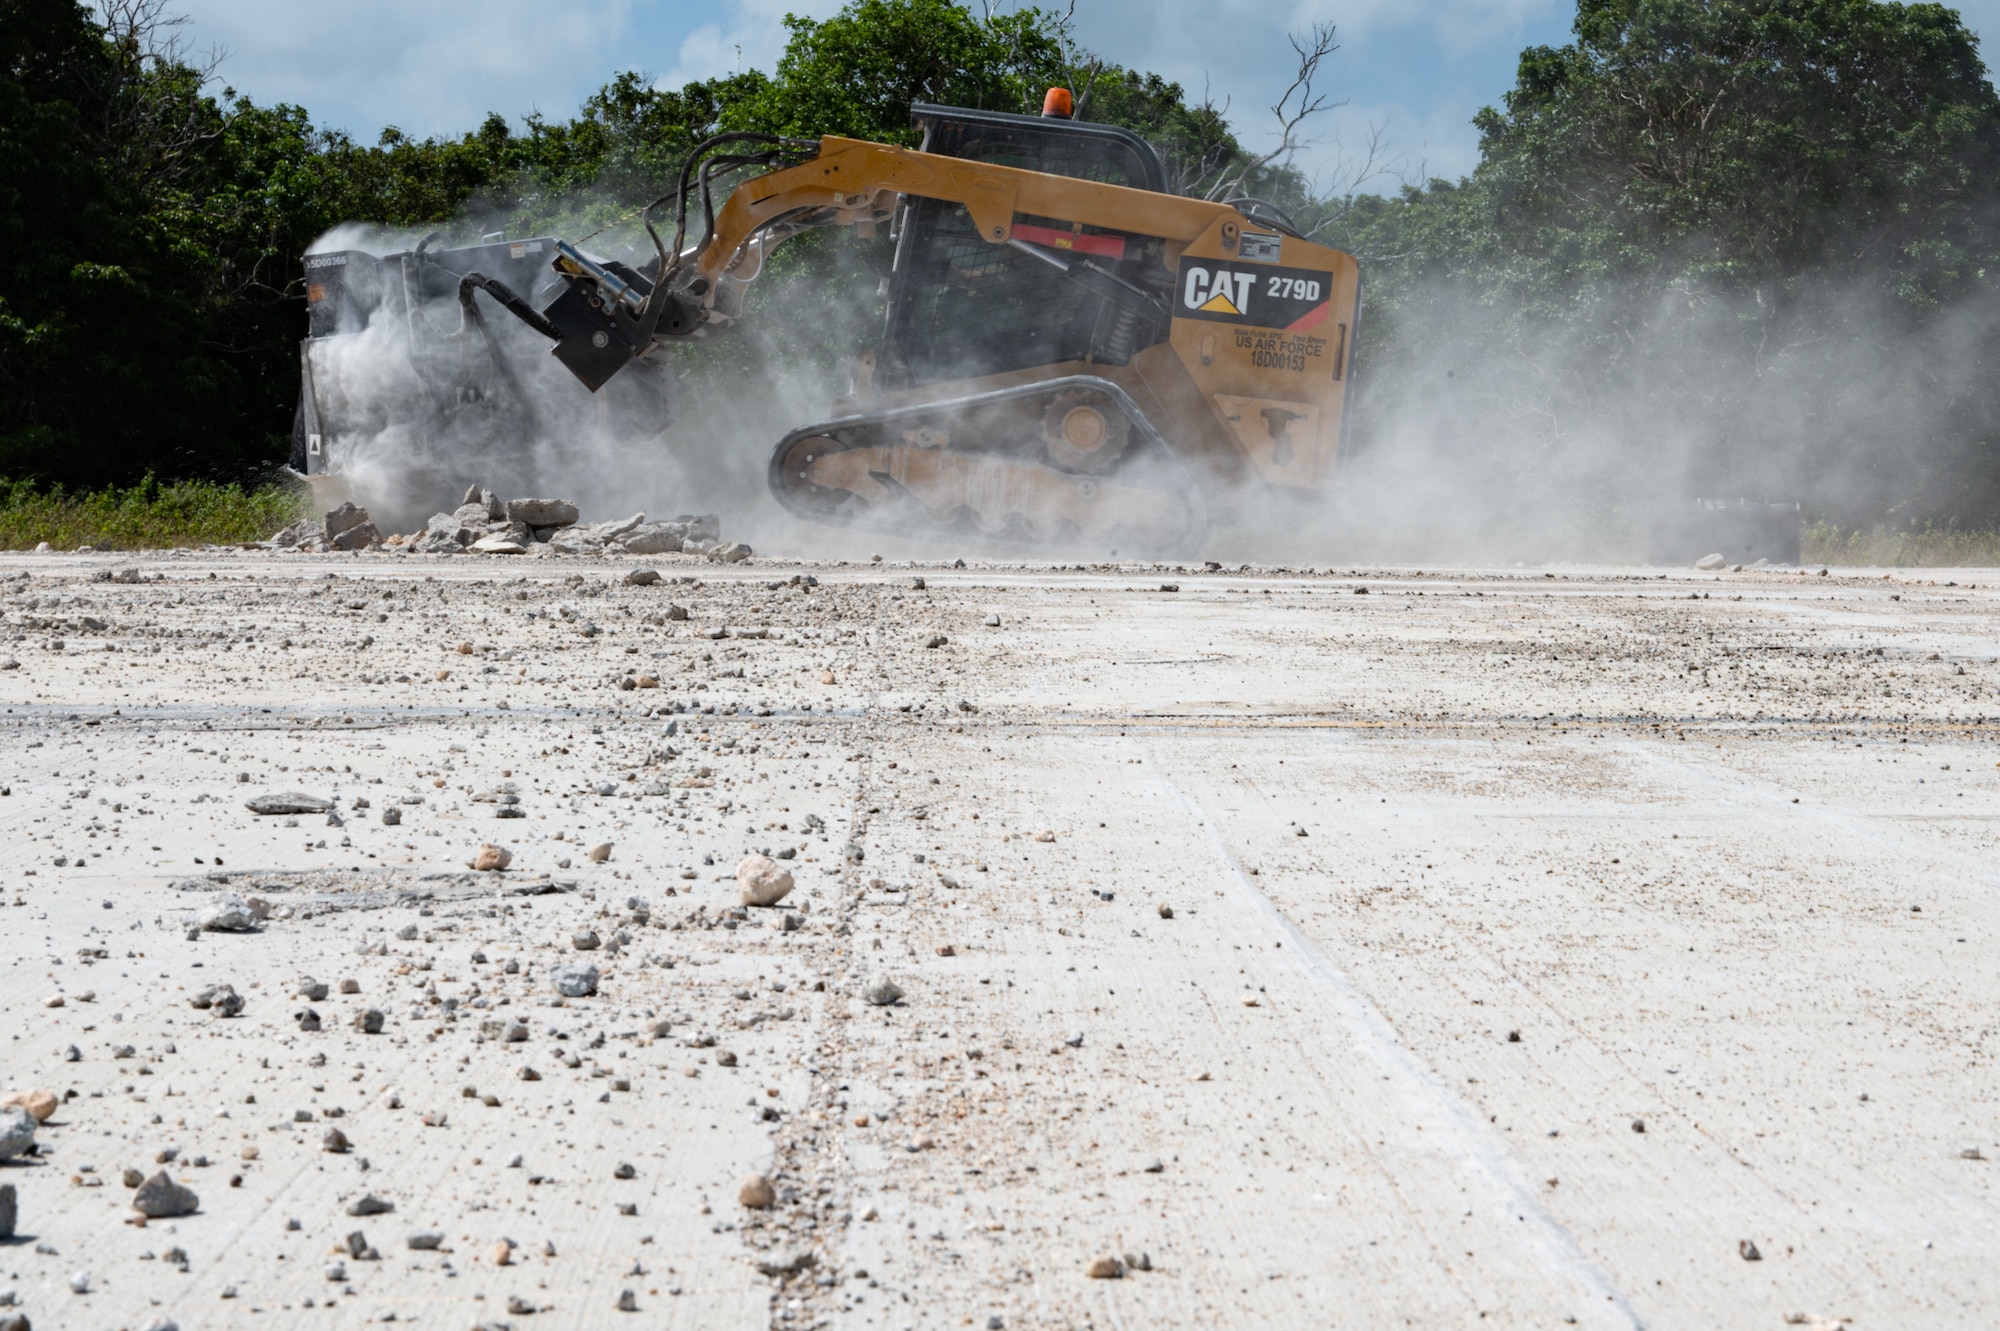 A 36th Civil Engineer Squadron Airman uses a compact track loader with a concrete saw attachment to cut concrete during an expedient and expeditionary airfield damage repair demonstration hosted by Headquarters Pacific Air Forces Civil Engineer Division at the Pacific Regional Training Center-Andersen, Guam, April 20, 2023. Sixteen Airmen from the 36th CES were provided two days of vehicle and material familiarization from the 554th Rapid Engineer Deployable Heavy Operational Repair Squadron Engineers and the Air Force Civil Engineer Center to complete airfield damage repair using the smaller packages of Airmen and equipment, called E-ADR. They used their familiarization to validate the E-ADR concept, in support of a Pacific Air Forces agile combat employment, repairing 10 craters with a lighter and leaner vehicle and equipment kit that weighs a fraction of a standard Rapid Airfield Damage Recovery package. (U.S. Air Force photo by Staff Sgt. Suzie Plotnikov)